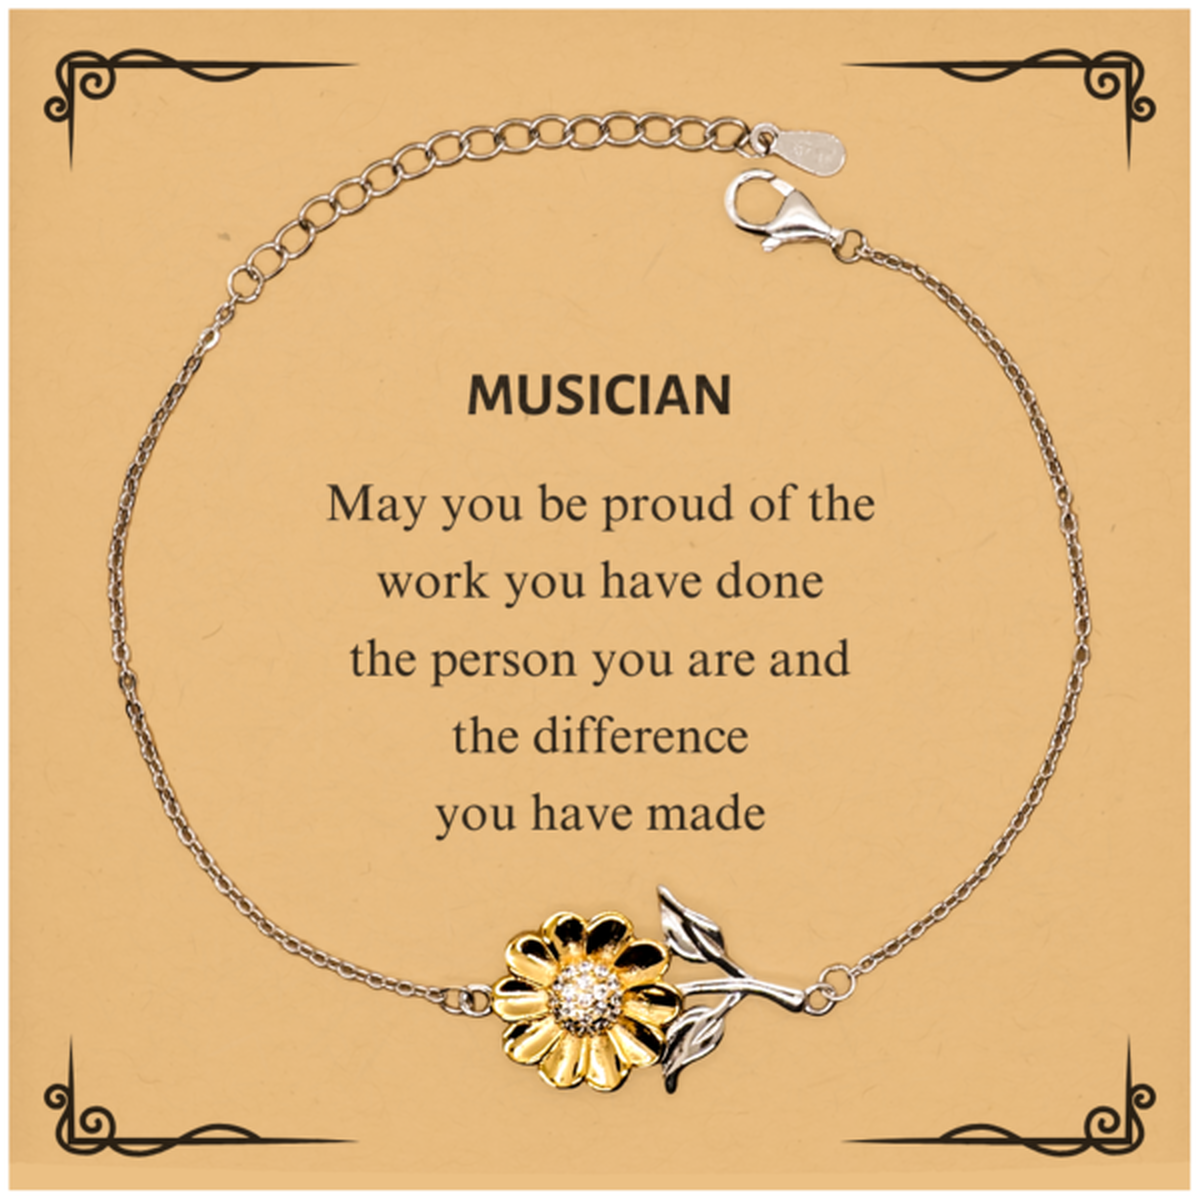 Musician May you be proud of the work you have done, Retirement Musician Sunflower Bracelet for Colleague Appreciation Gifts Amazing for Musician